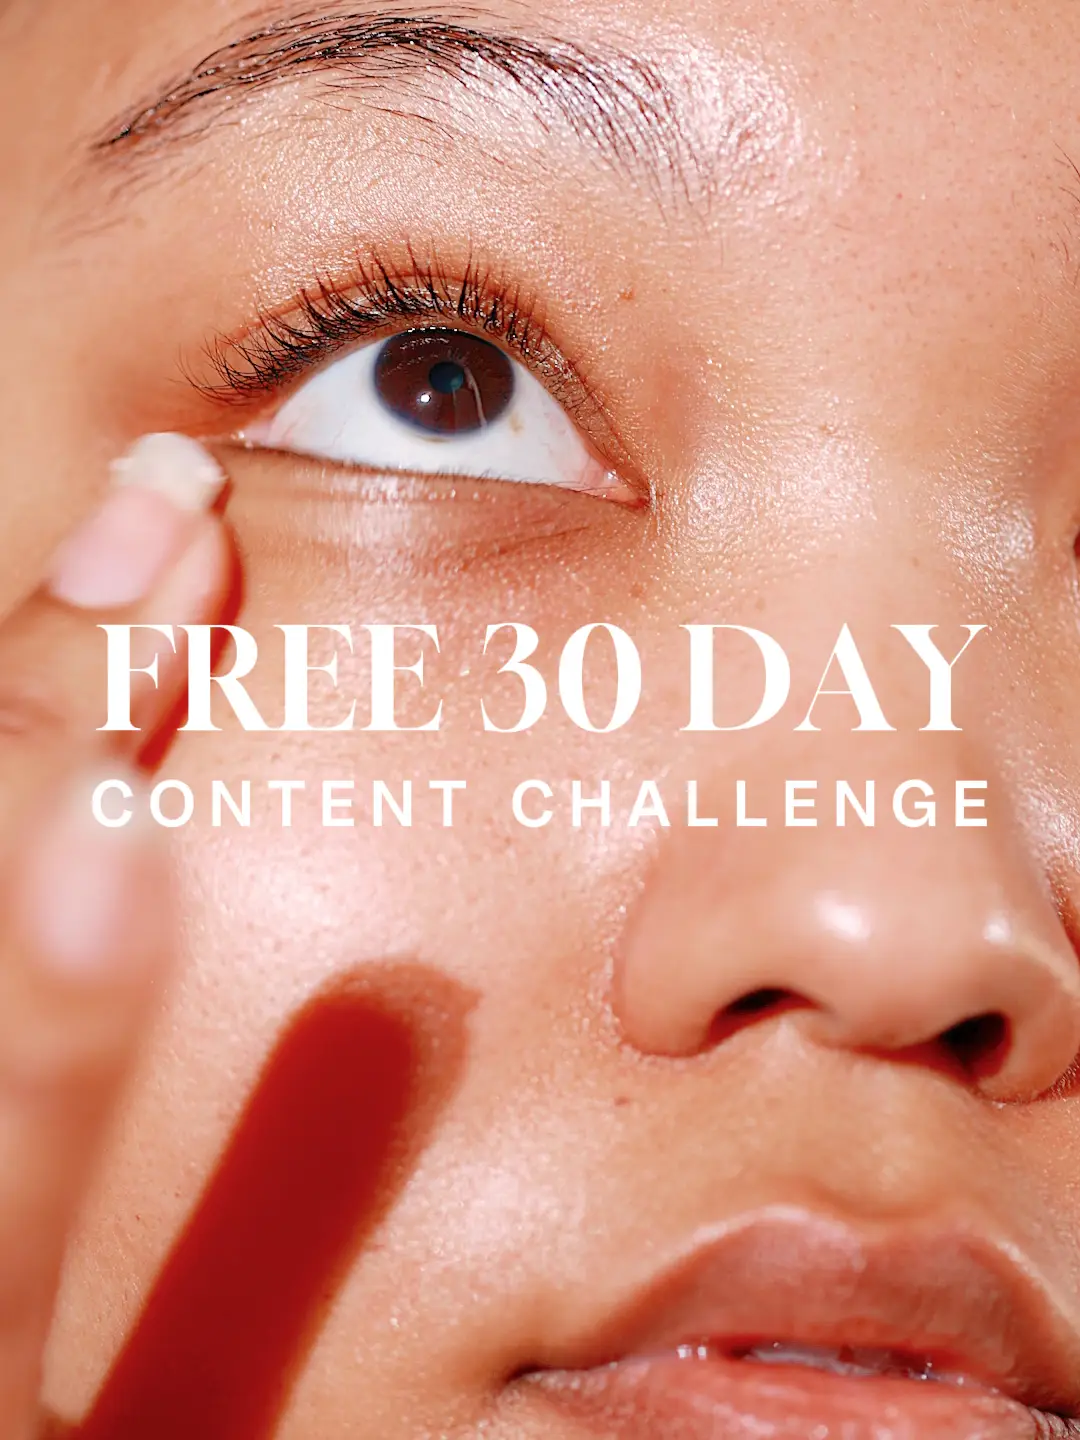 Free 30 Day Content Challenge's images